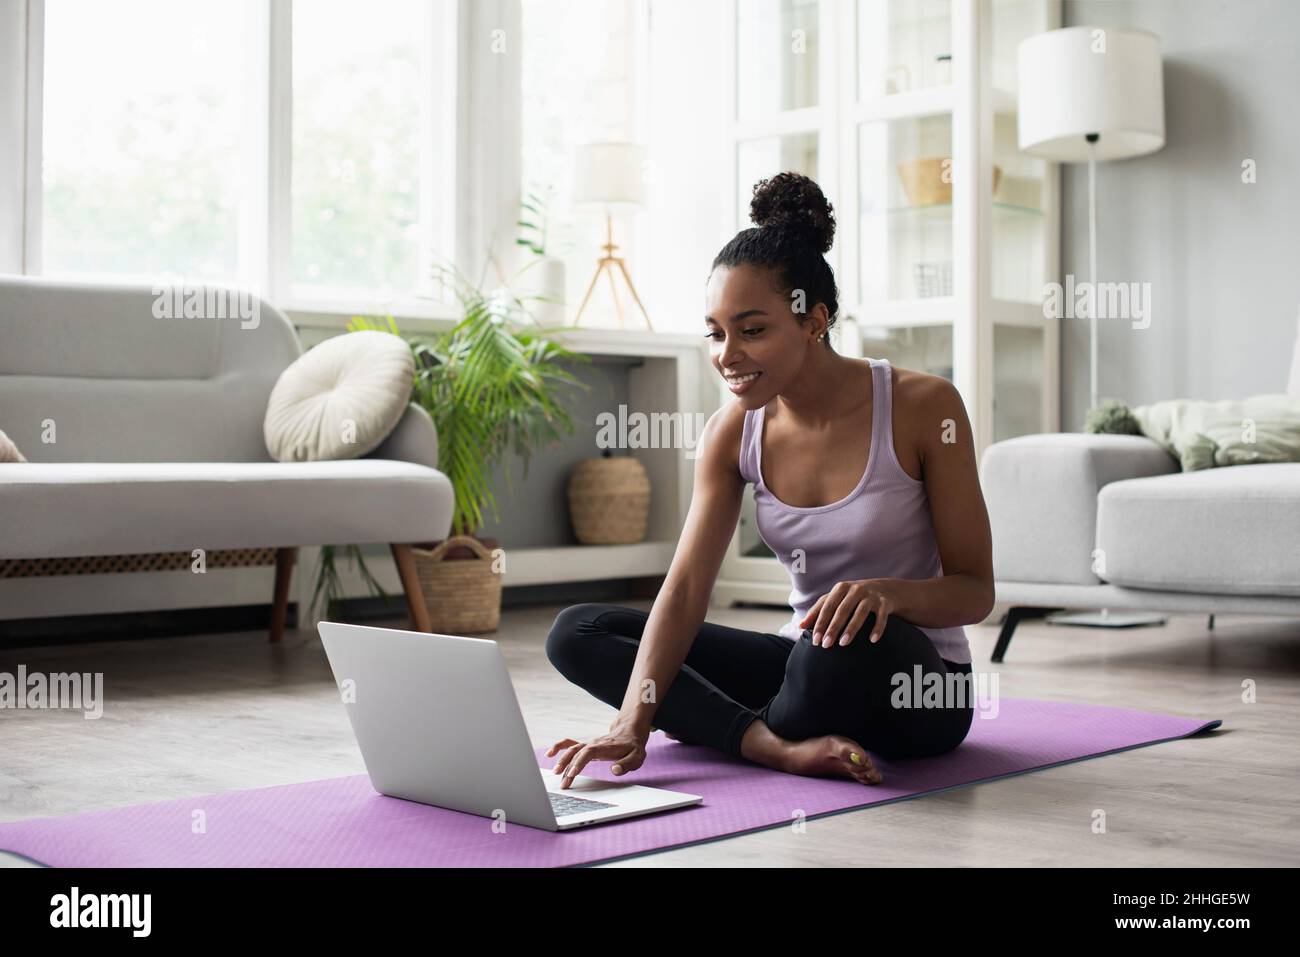 Young woman doing fitness exercises at home. Online video training. Meditation, relaxation, healthy lifestyle, self-care, online training class, yoga Stock Photo